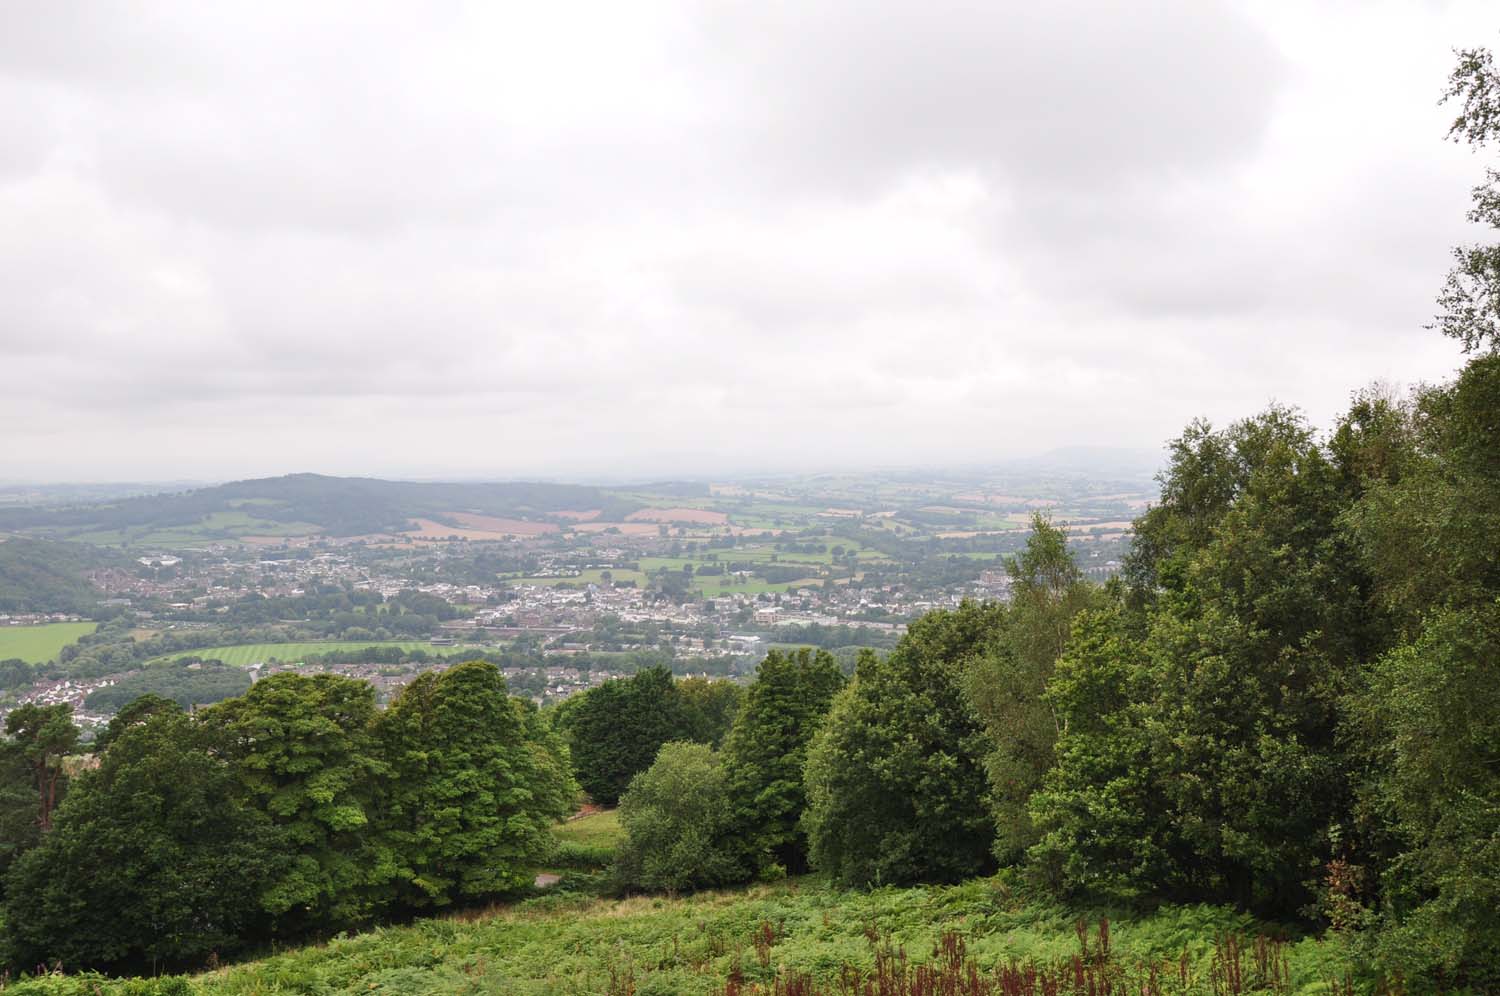 Perched high above the town, The Kymin boasts commanding views of Wales and England.